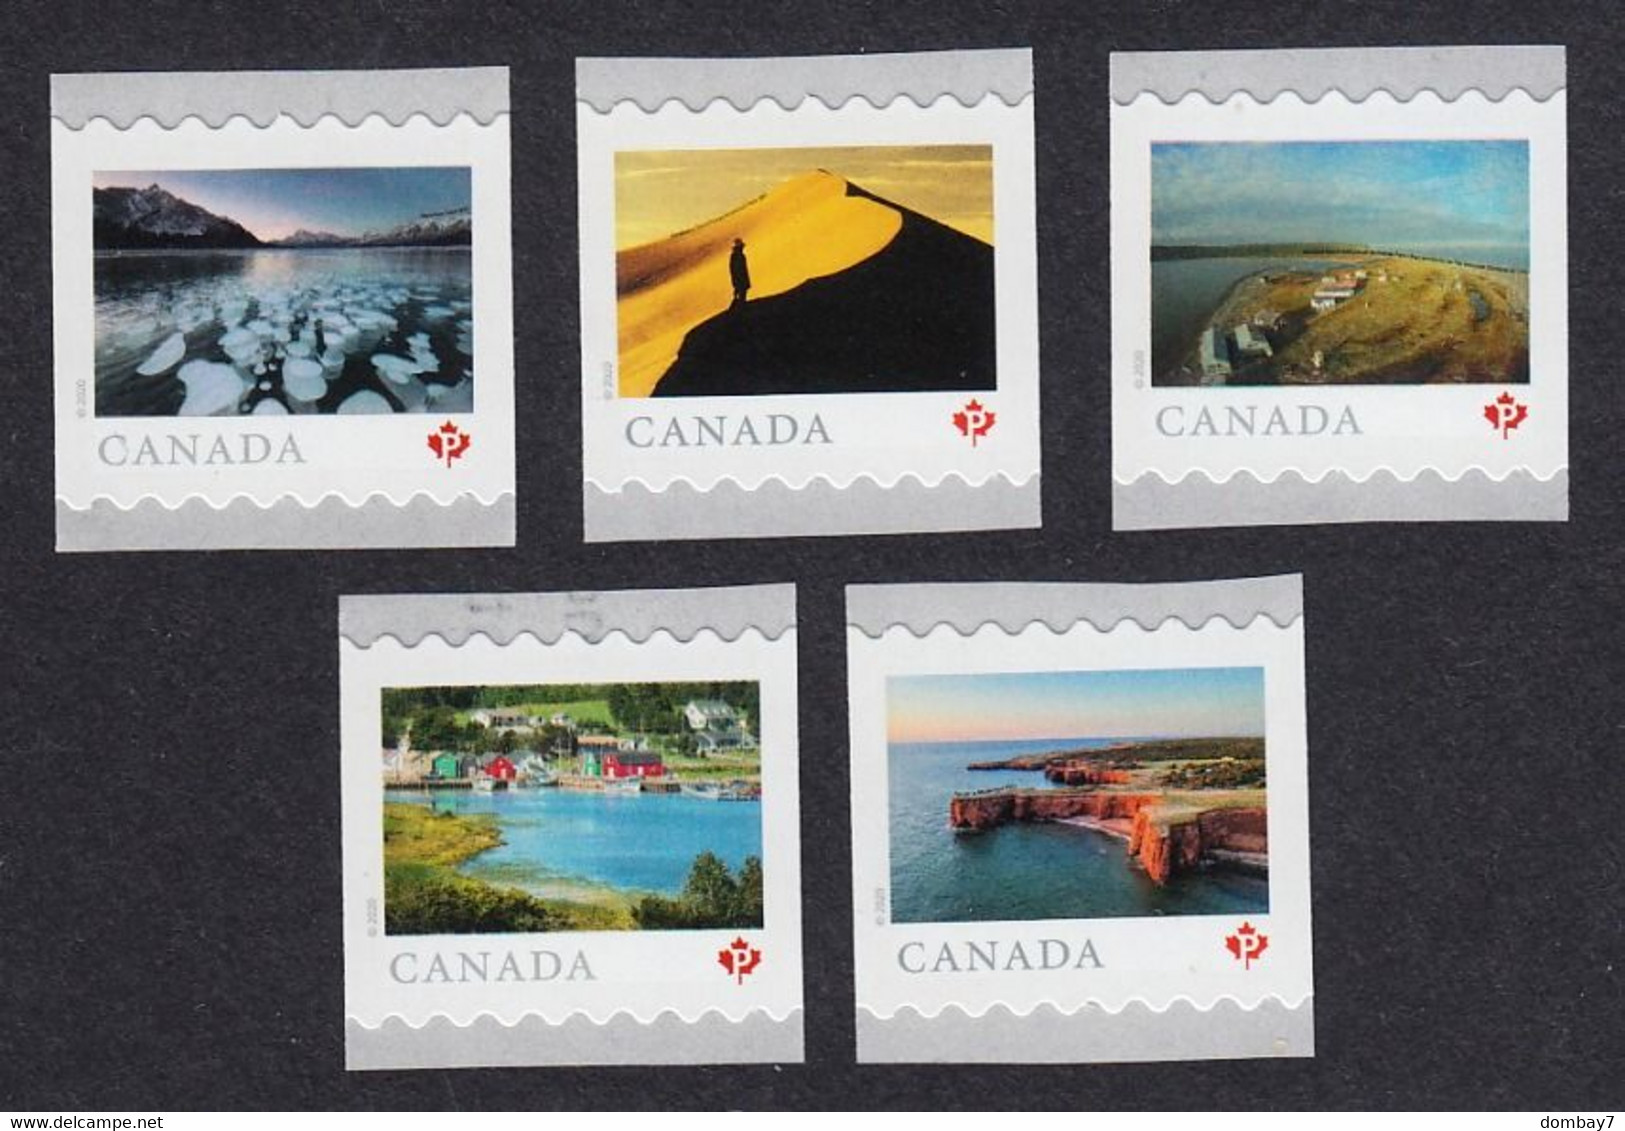 Qc. FROM FAR AND WIDE = Full Set Of 5 Stamps Cut From COIL / ROLL = MNH Canada 2020 Sc #3212-3216 - Ungebraucht